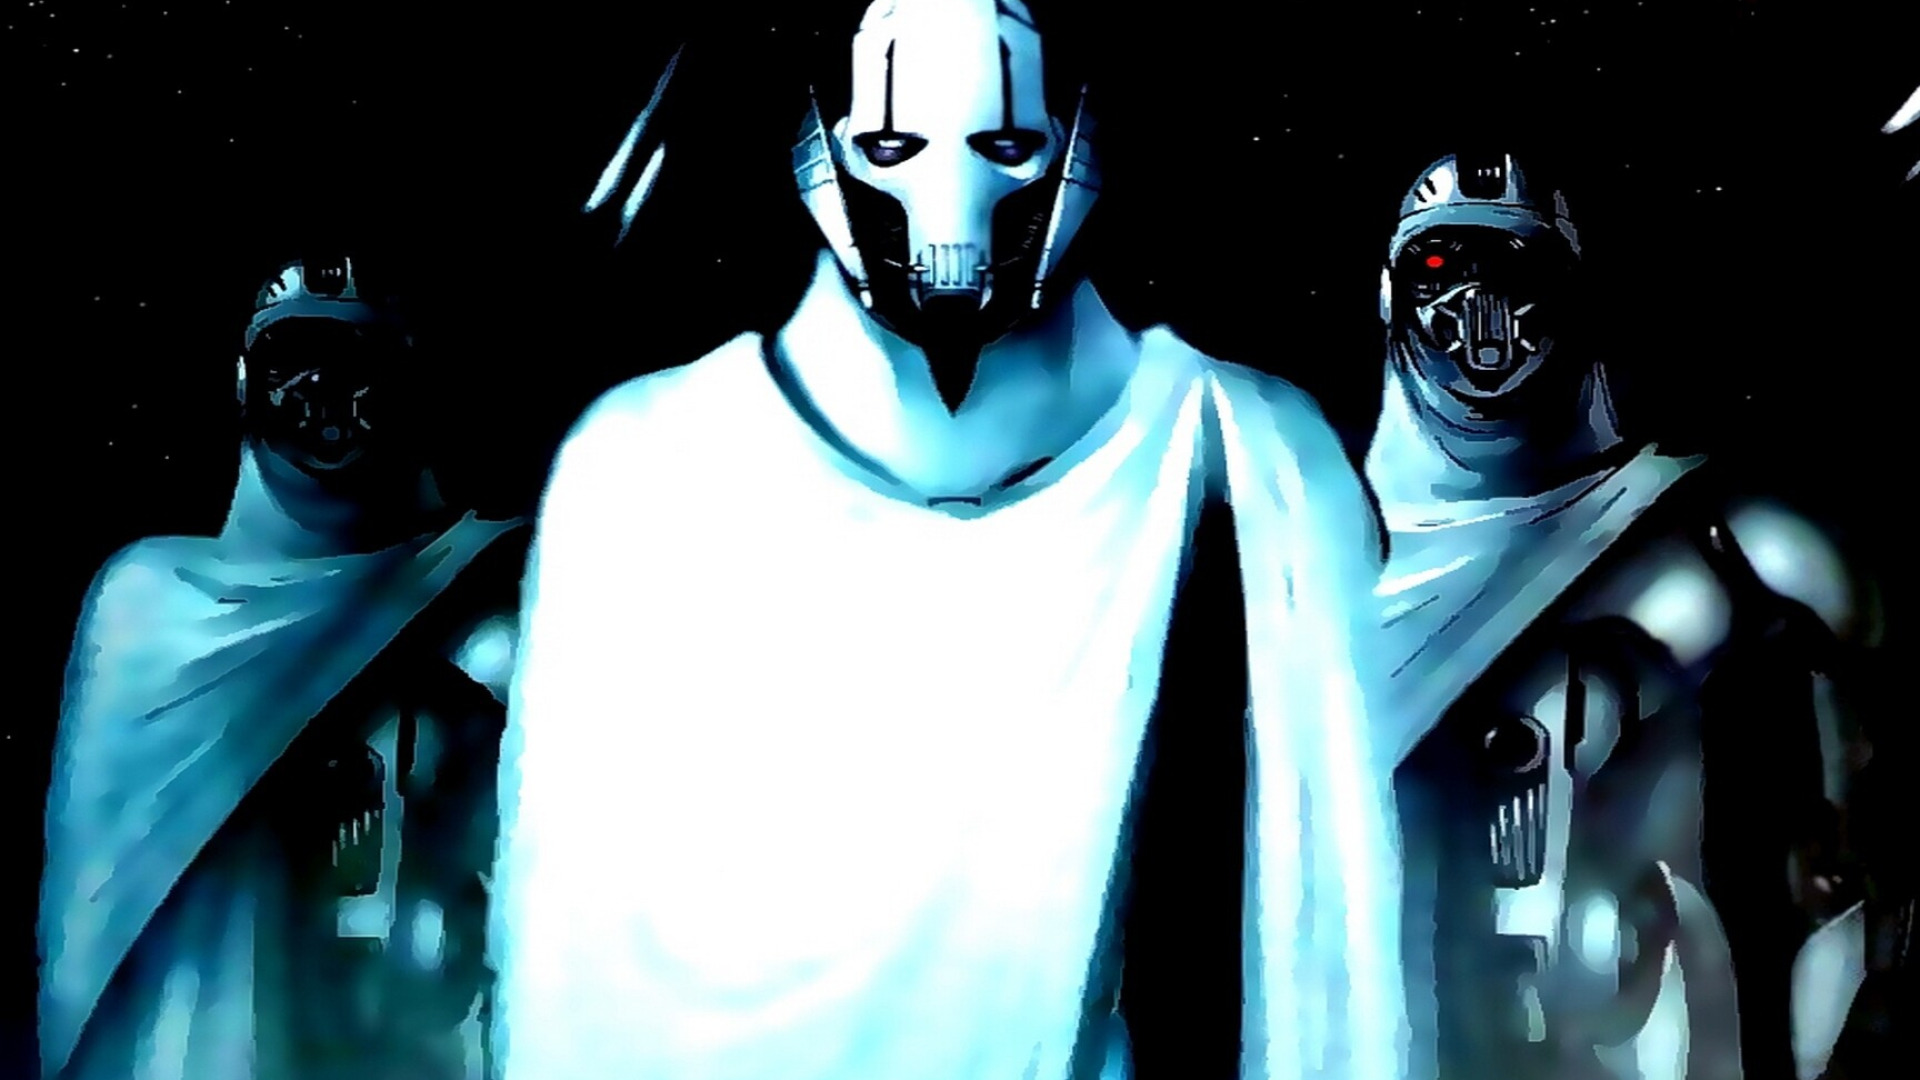 General Grievous: A military strategist, Gaining a reputation for hunting and killing Jedi Knights, The Supreme Commander. 1920x1080 Full HD Wallpaper.